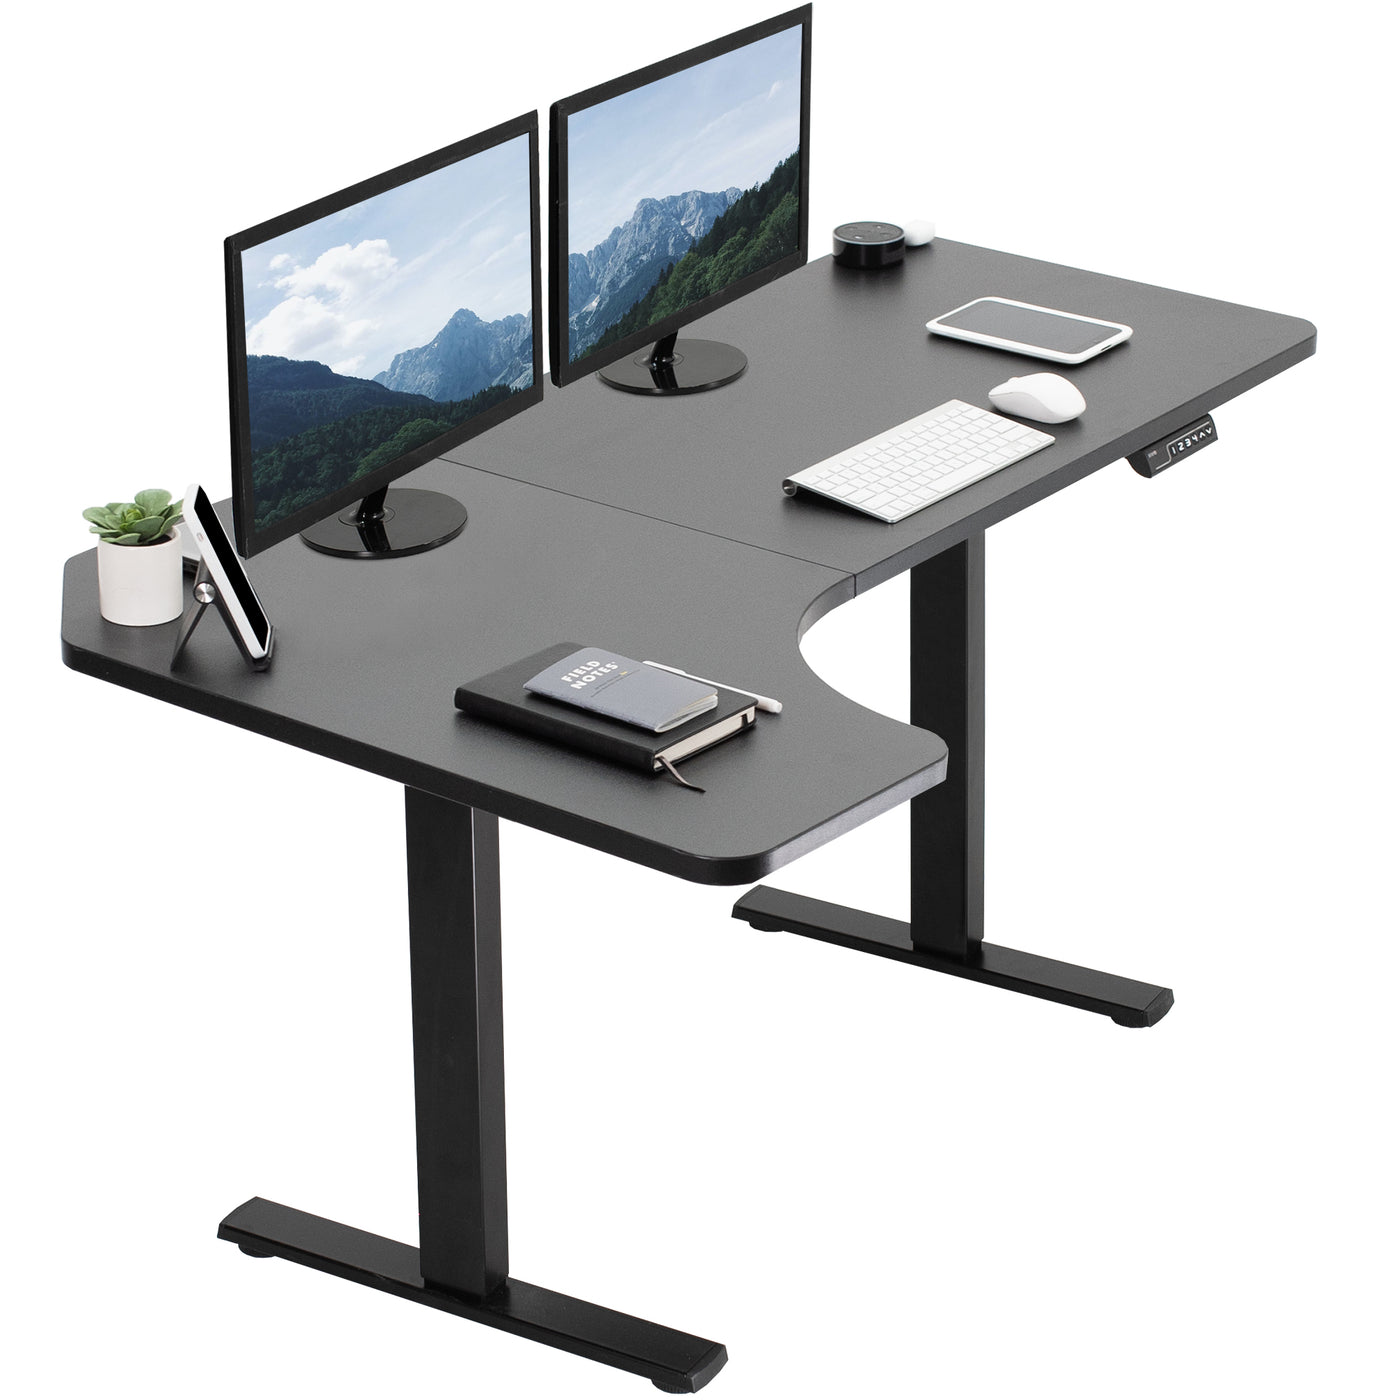 Slight side curved electric desk with room for office equipment.